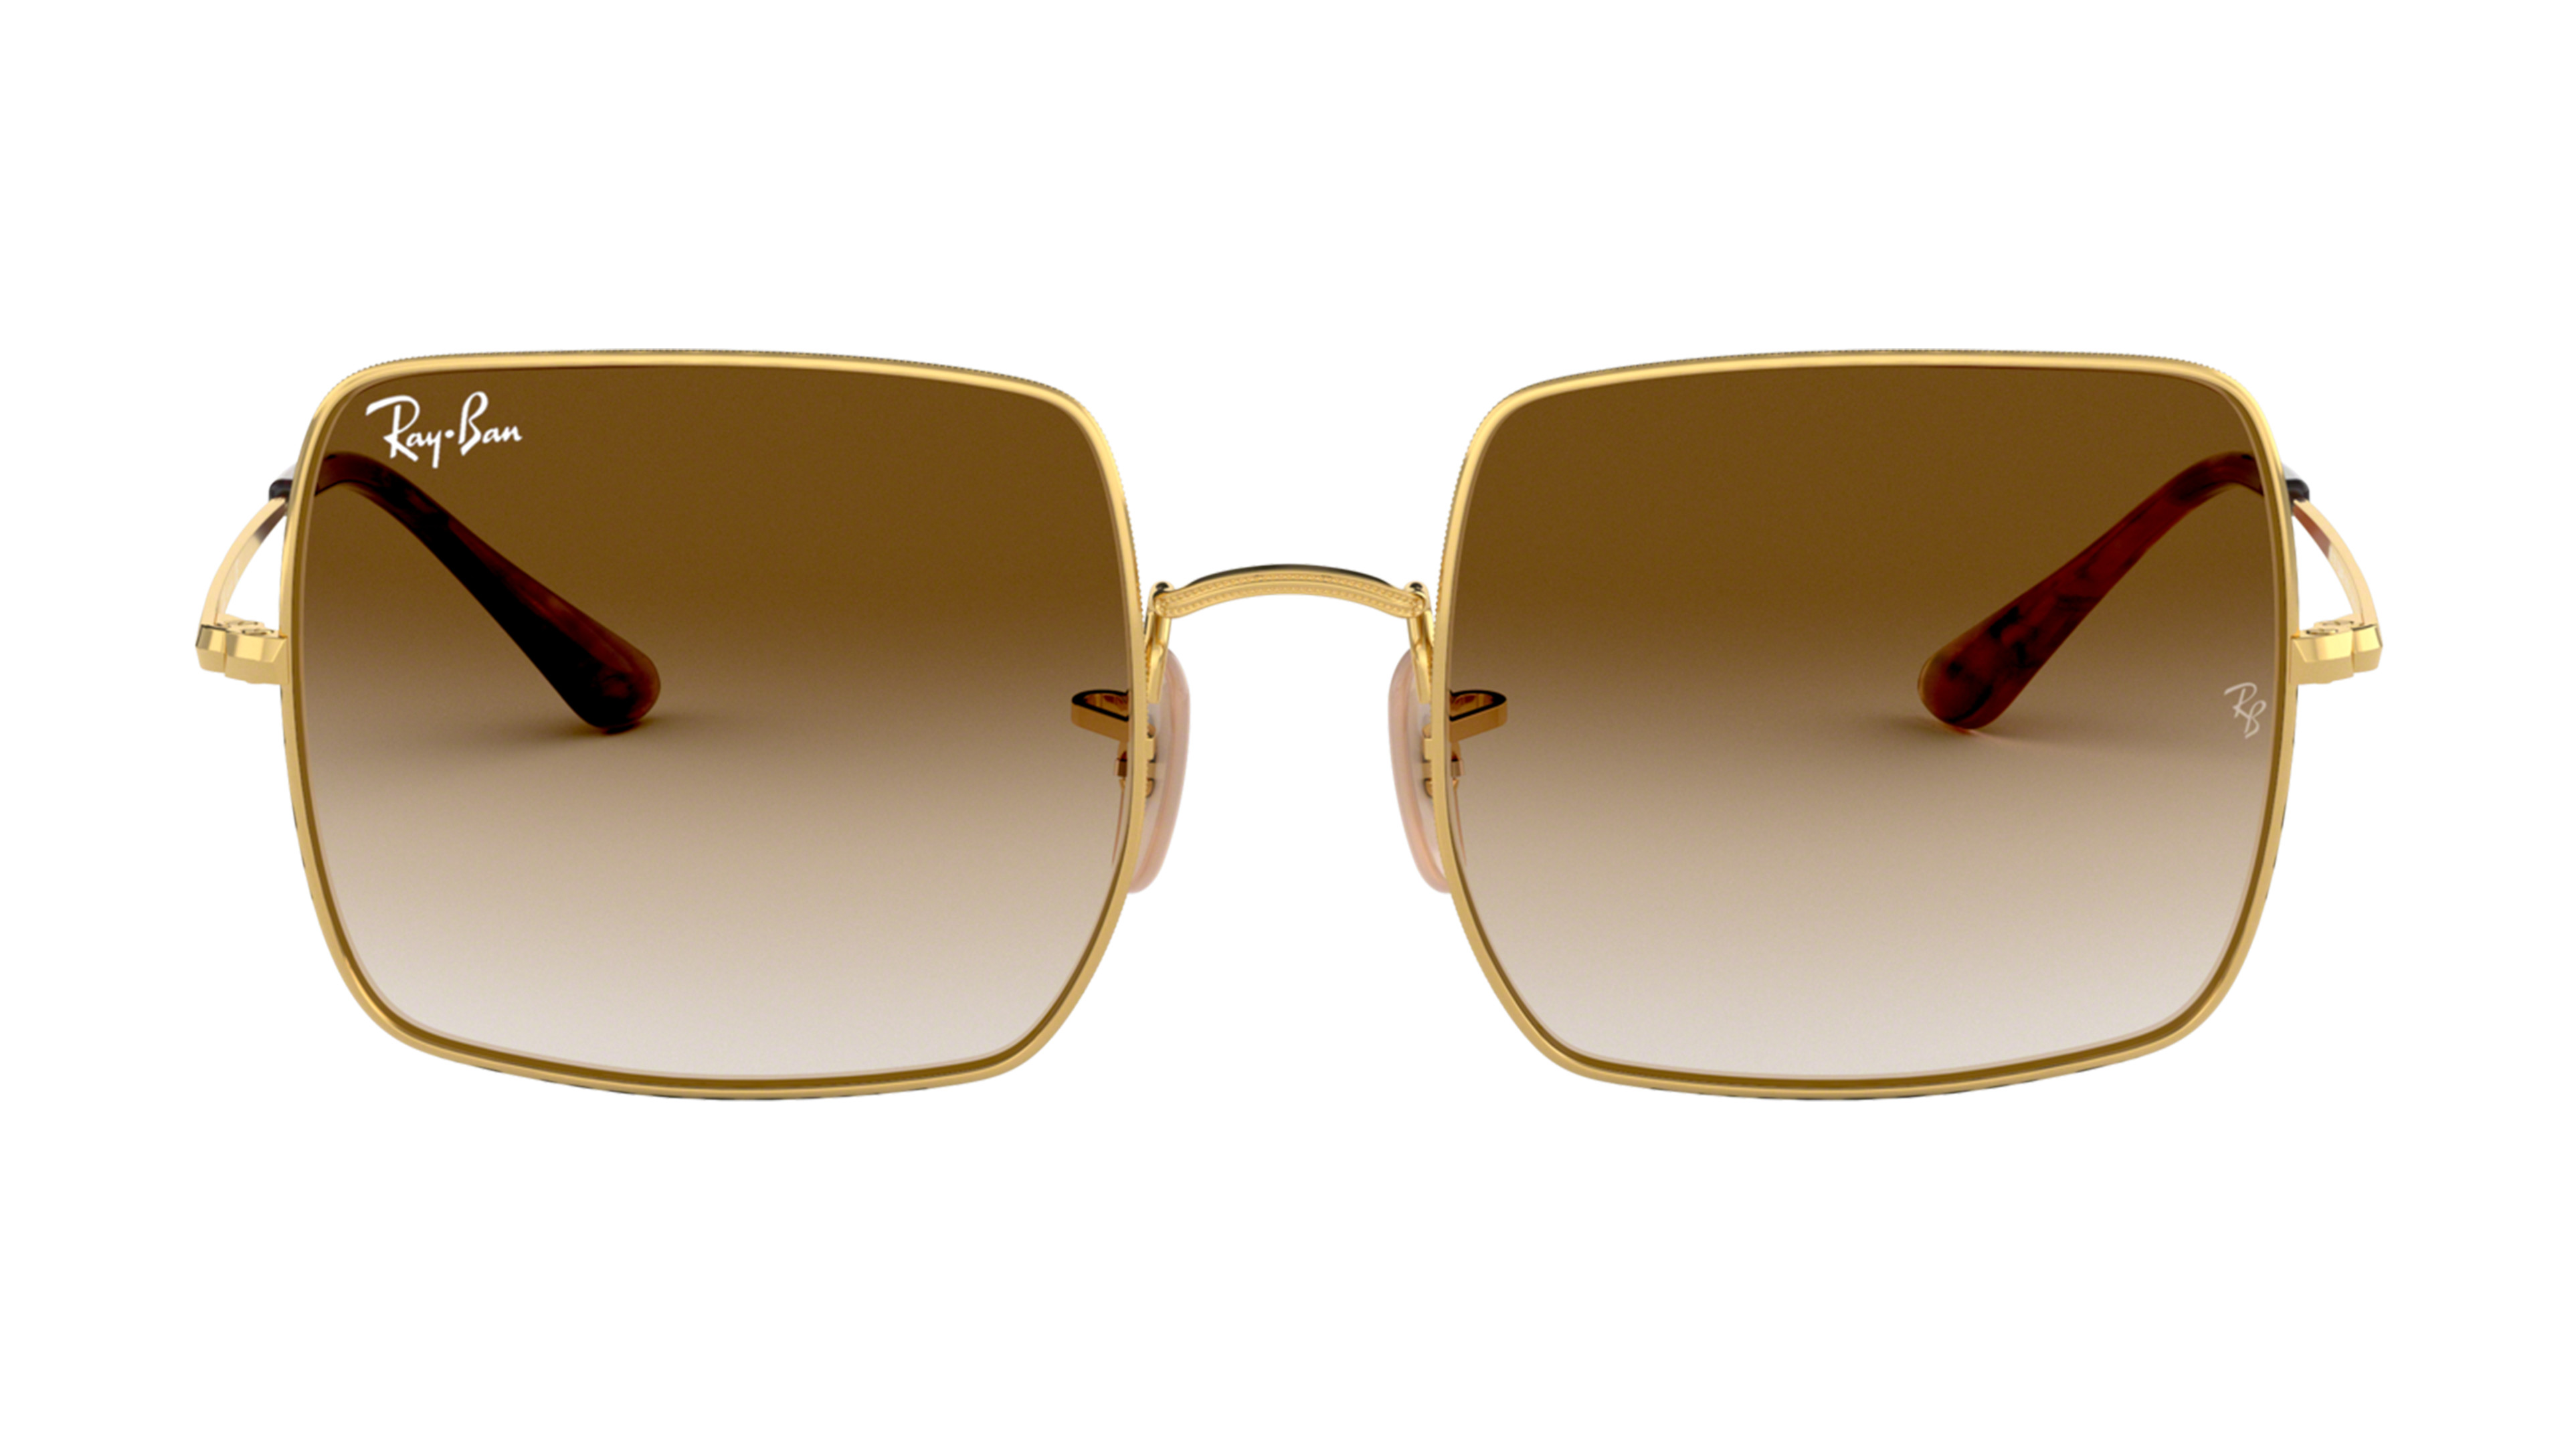 [products.image.front] Ray-Ban Square 0RB1971 914751 Sonnenbrille